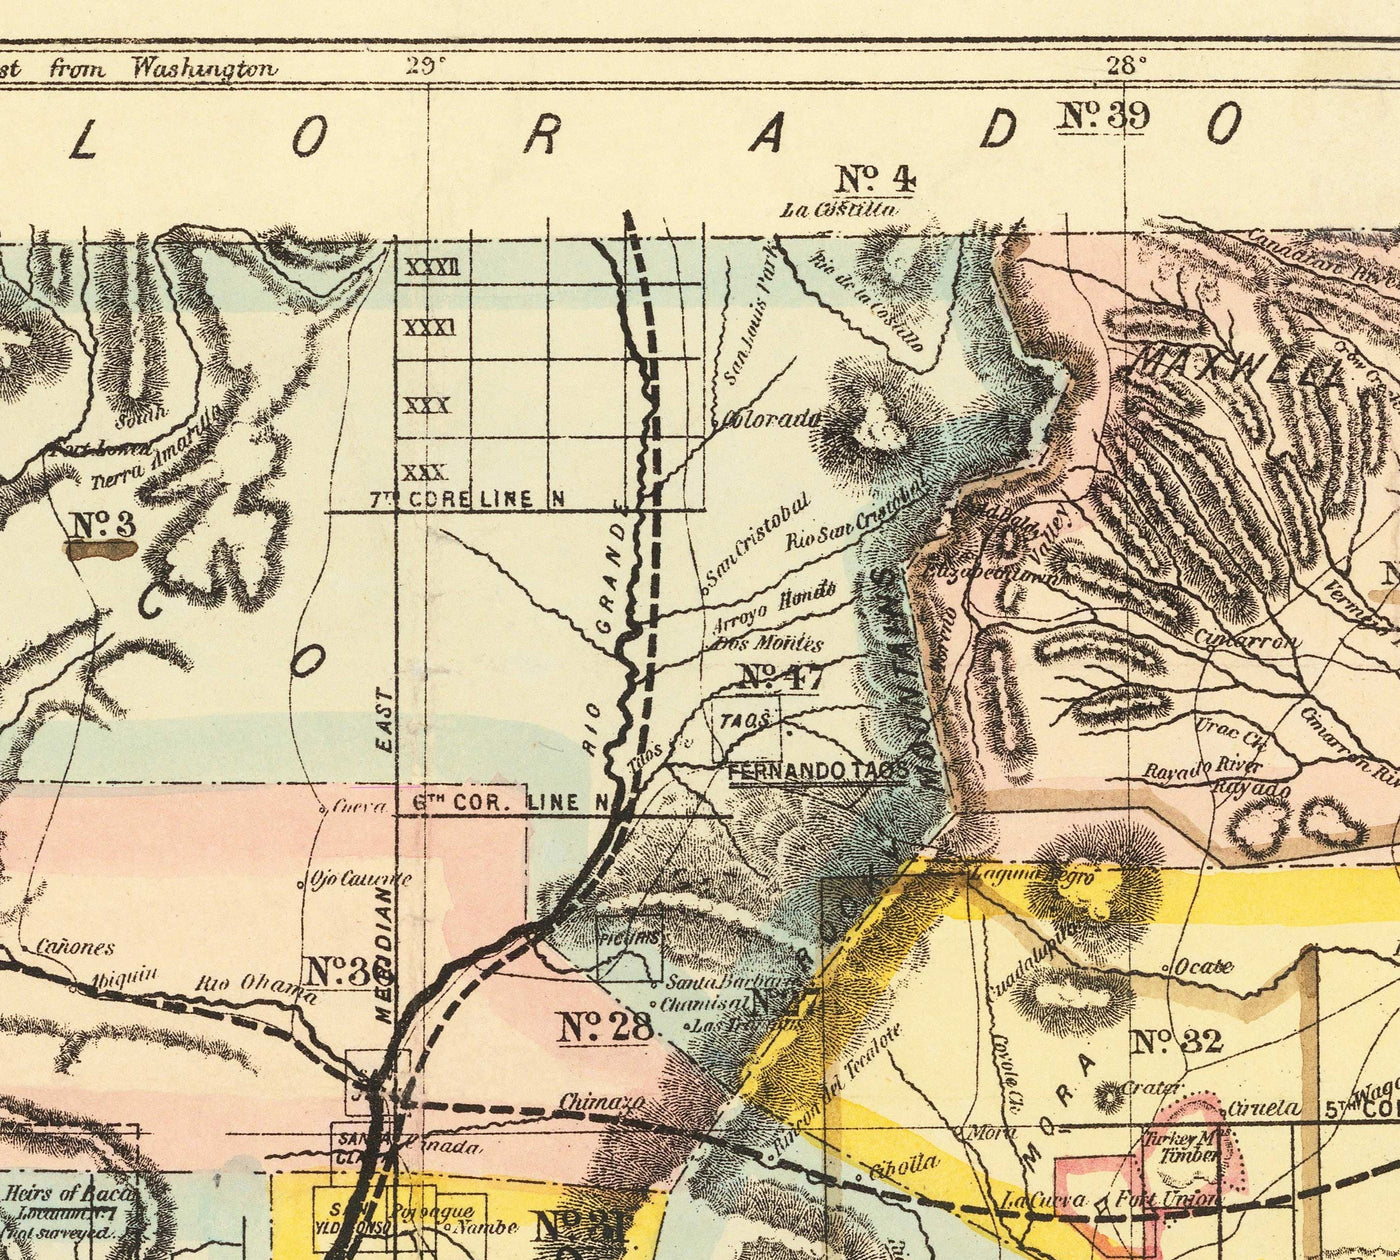 Old Map of New Mexico Territory, USA, 1873 - Land Grants, Rio Grande, Native Americans, Sante Fe, Rocky Mountains